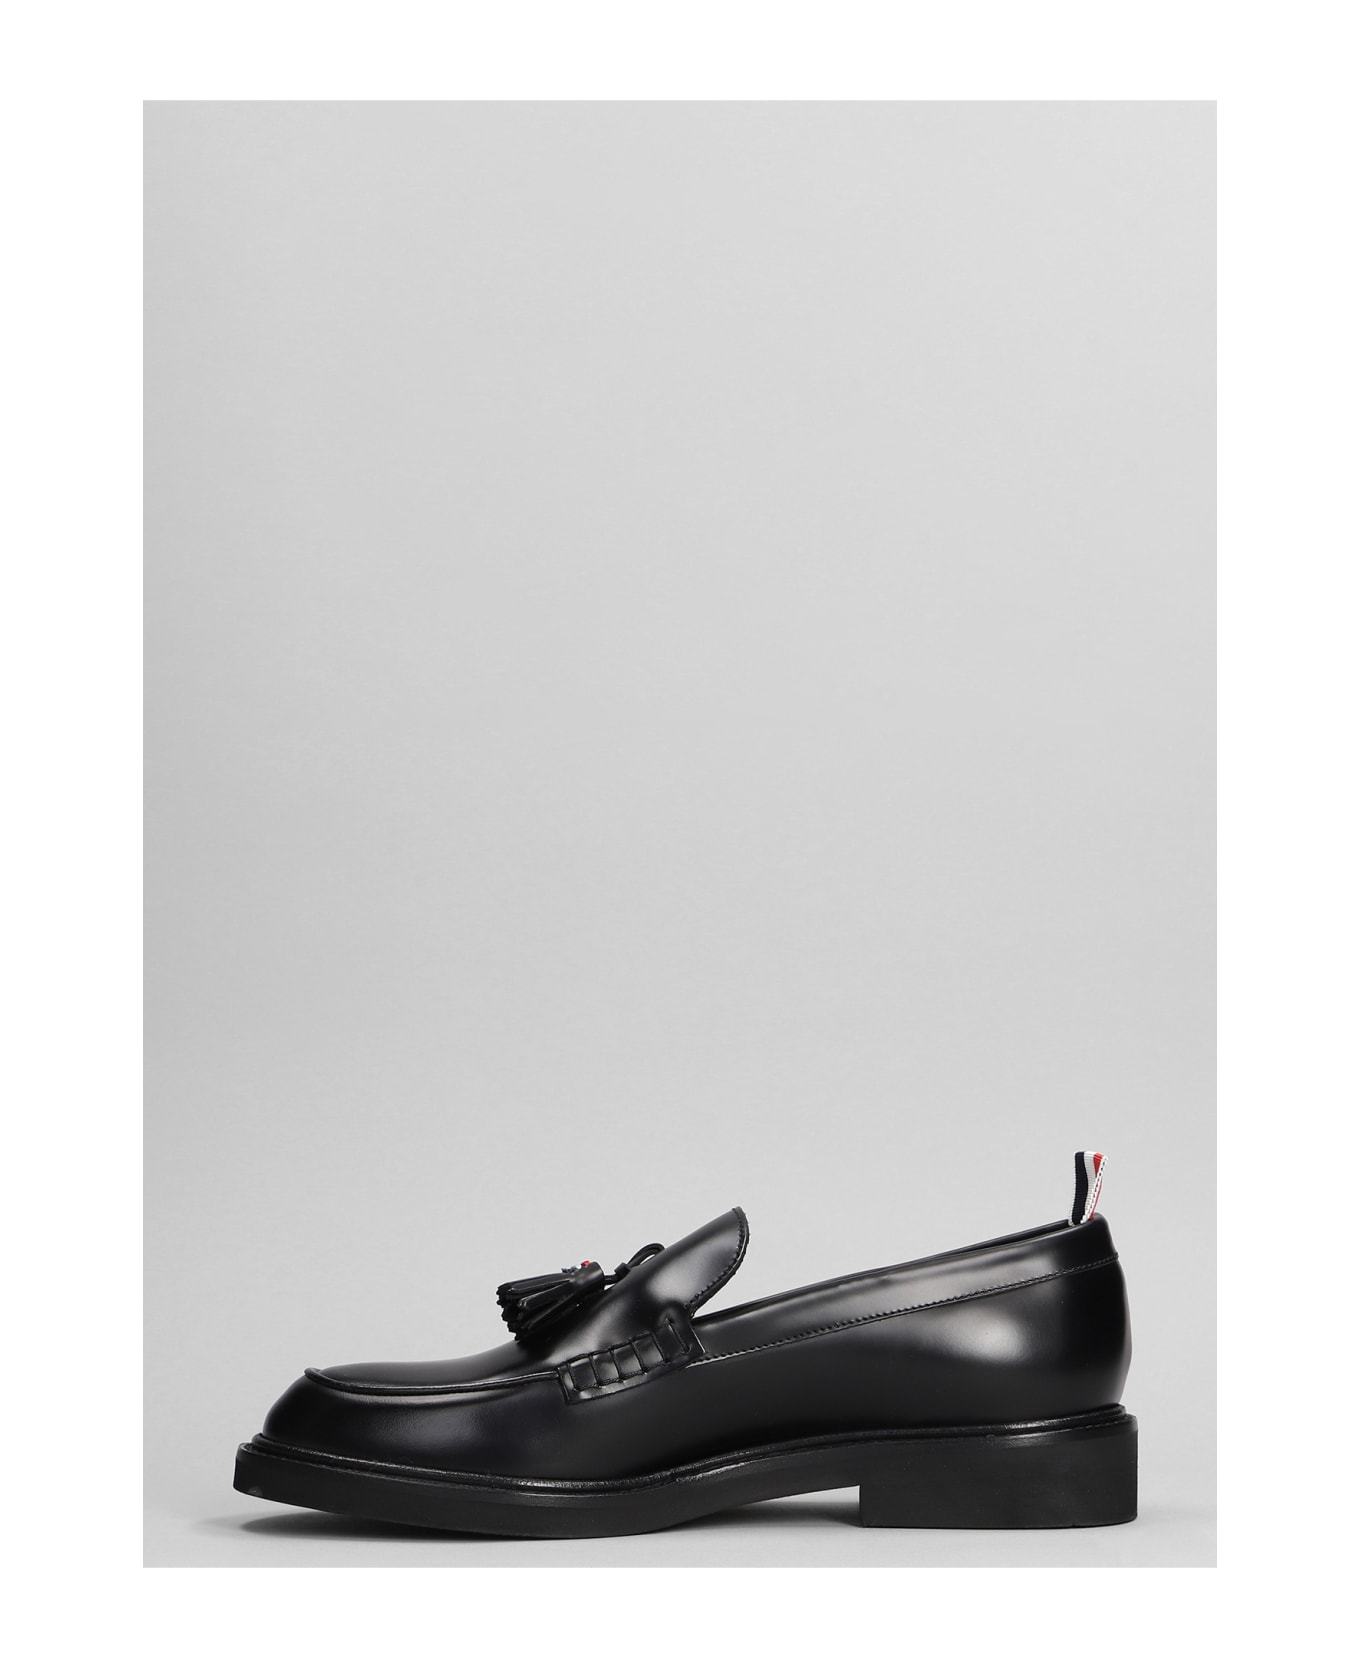 Thom Browne Loafers In Black Leather - black